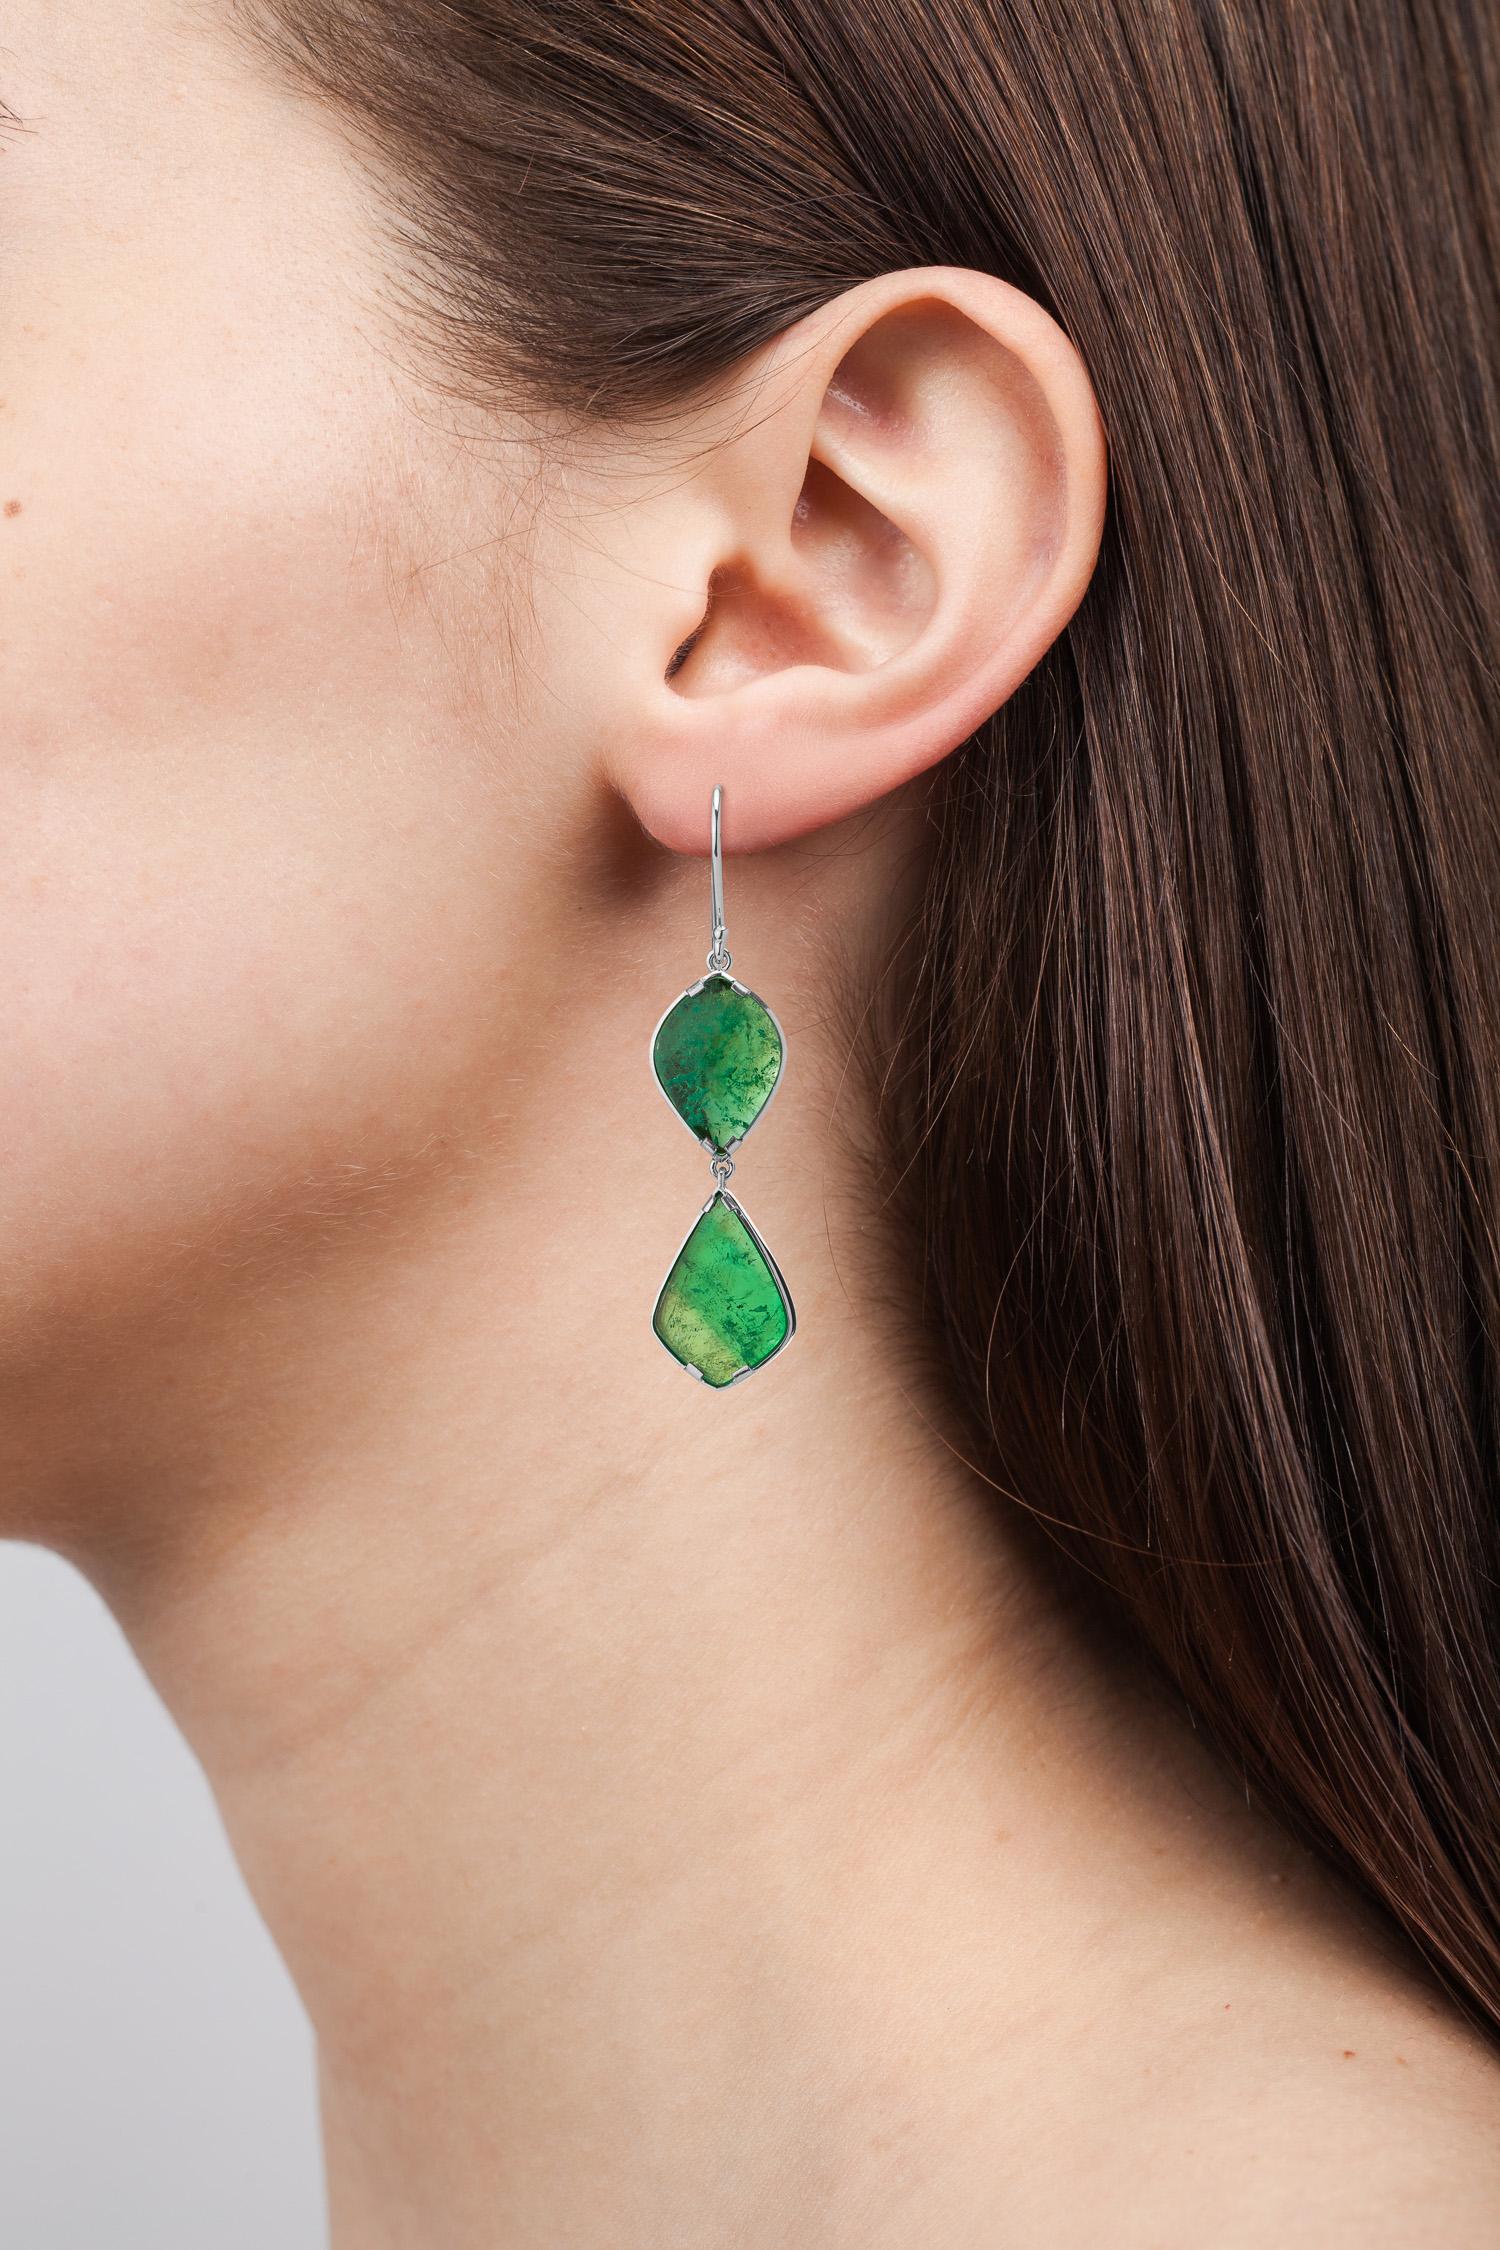 One of a kind 18 Karat white gold art deco style earrings set with Muzo colombian emerald slices weighing 14.79 carats.

Muzo Emerald Colombia Heritage Atocha Earrings set with 14.79 carats Emerald.

Atocha is inspired by a collection of jeweled